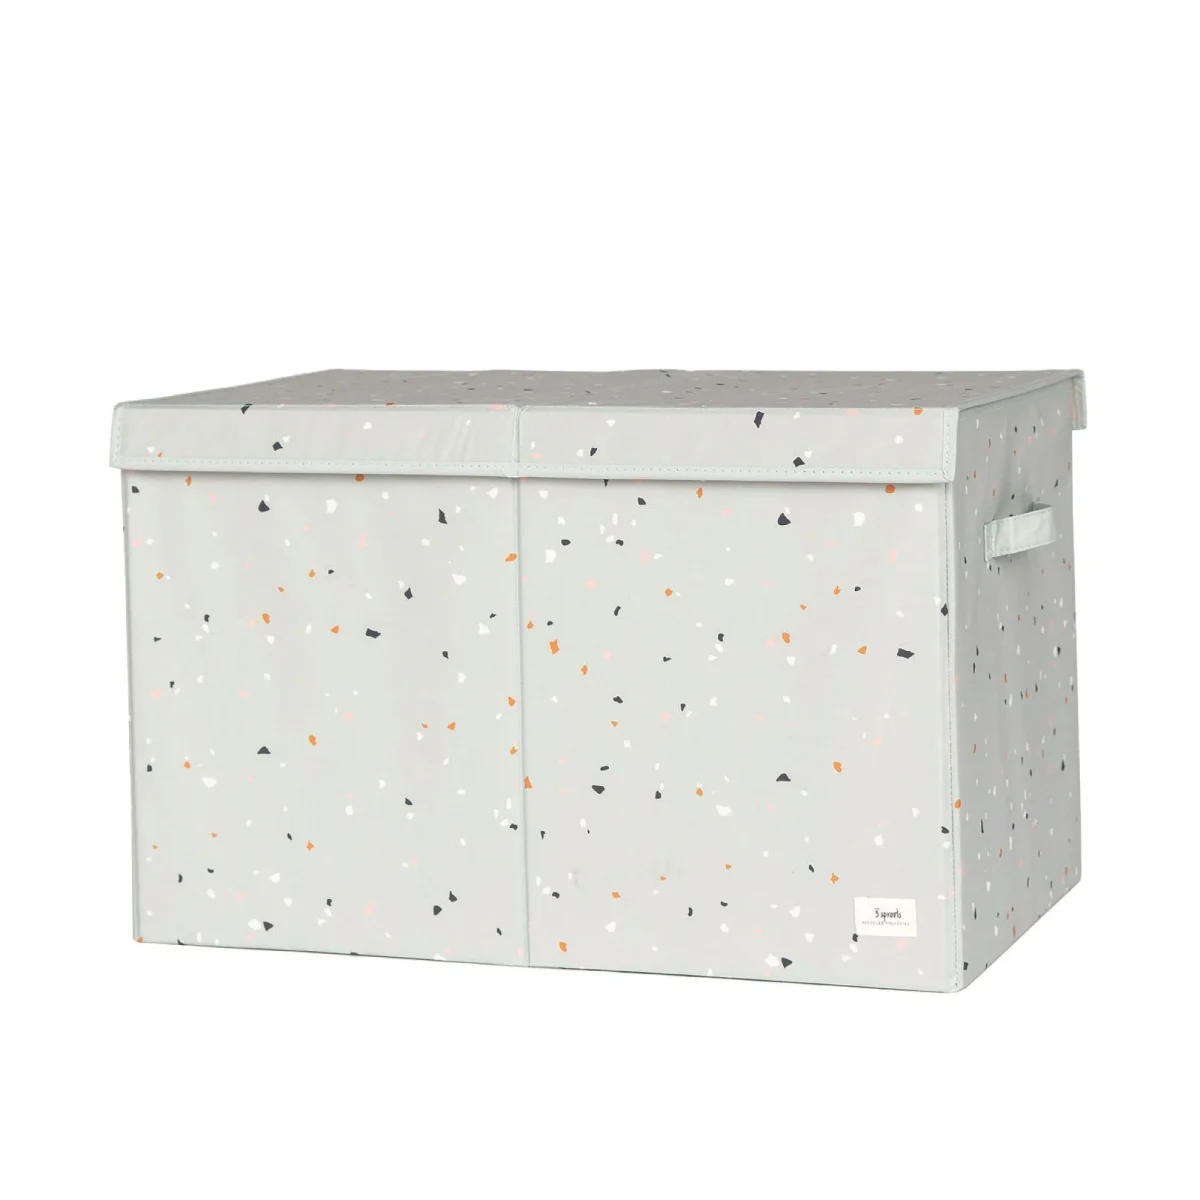 FCTGN 3Sprouts Folding Toy Chest Terrazzo Green 1 1024x1024@2x